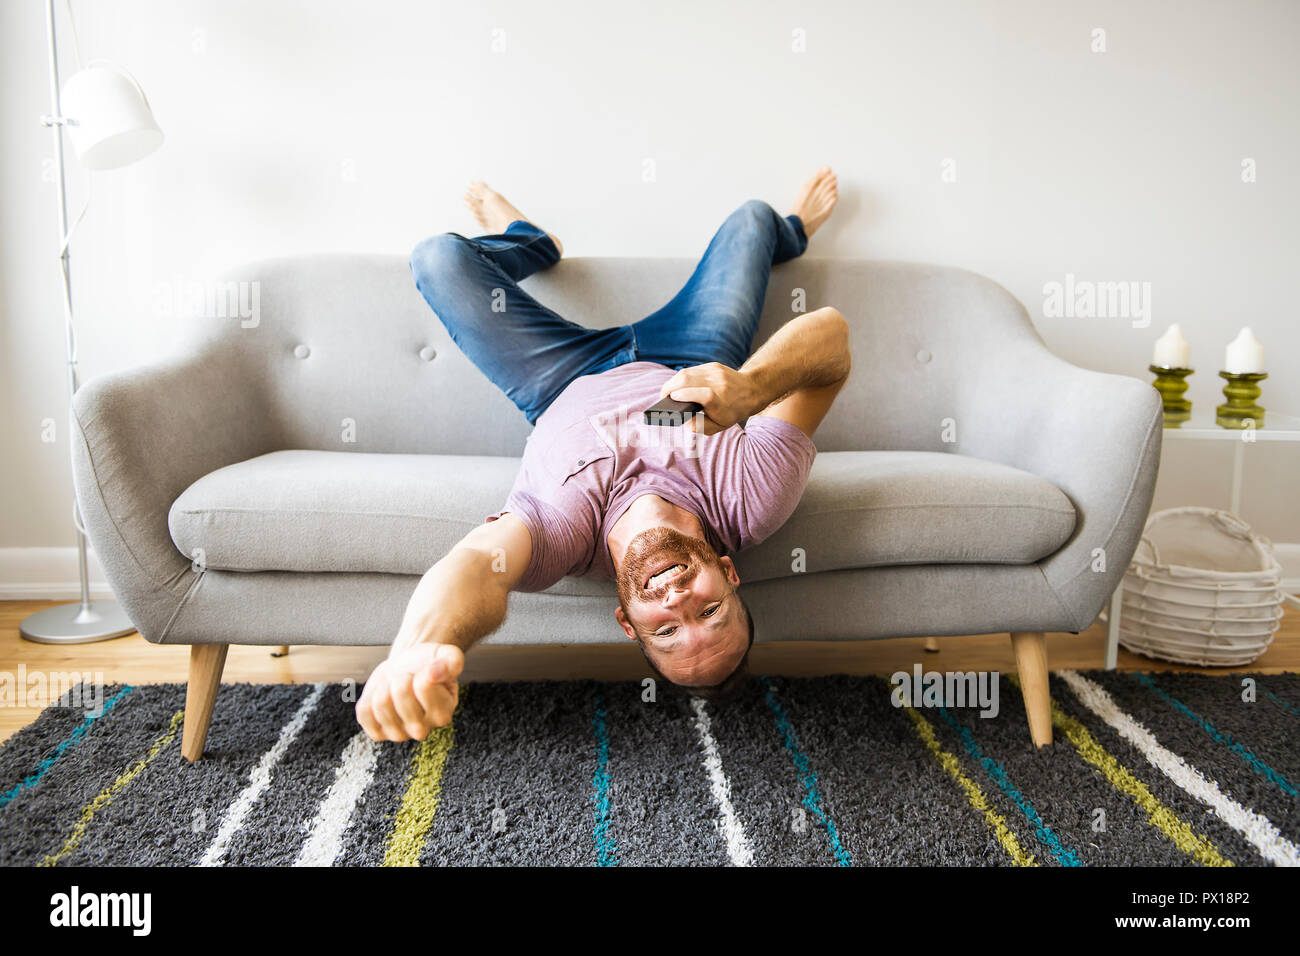 Man listening tv upside down on the sofa with tv remote Stock Photo